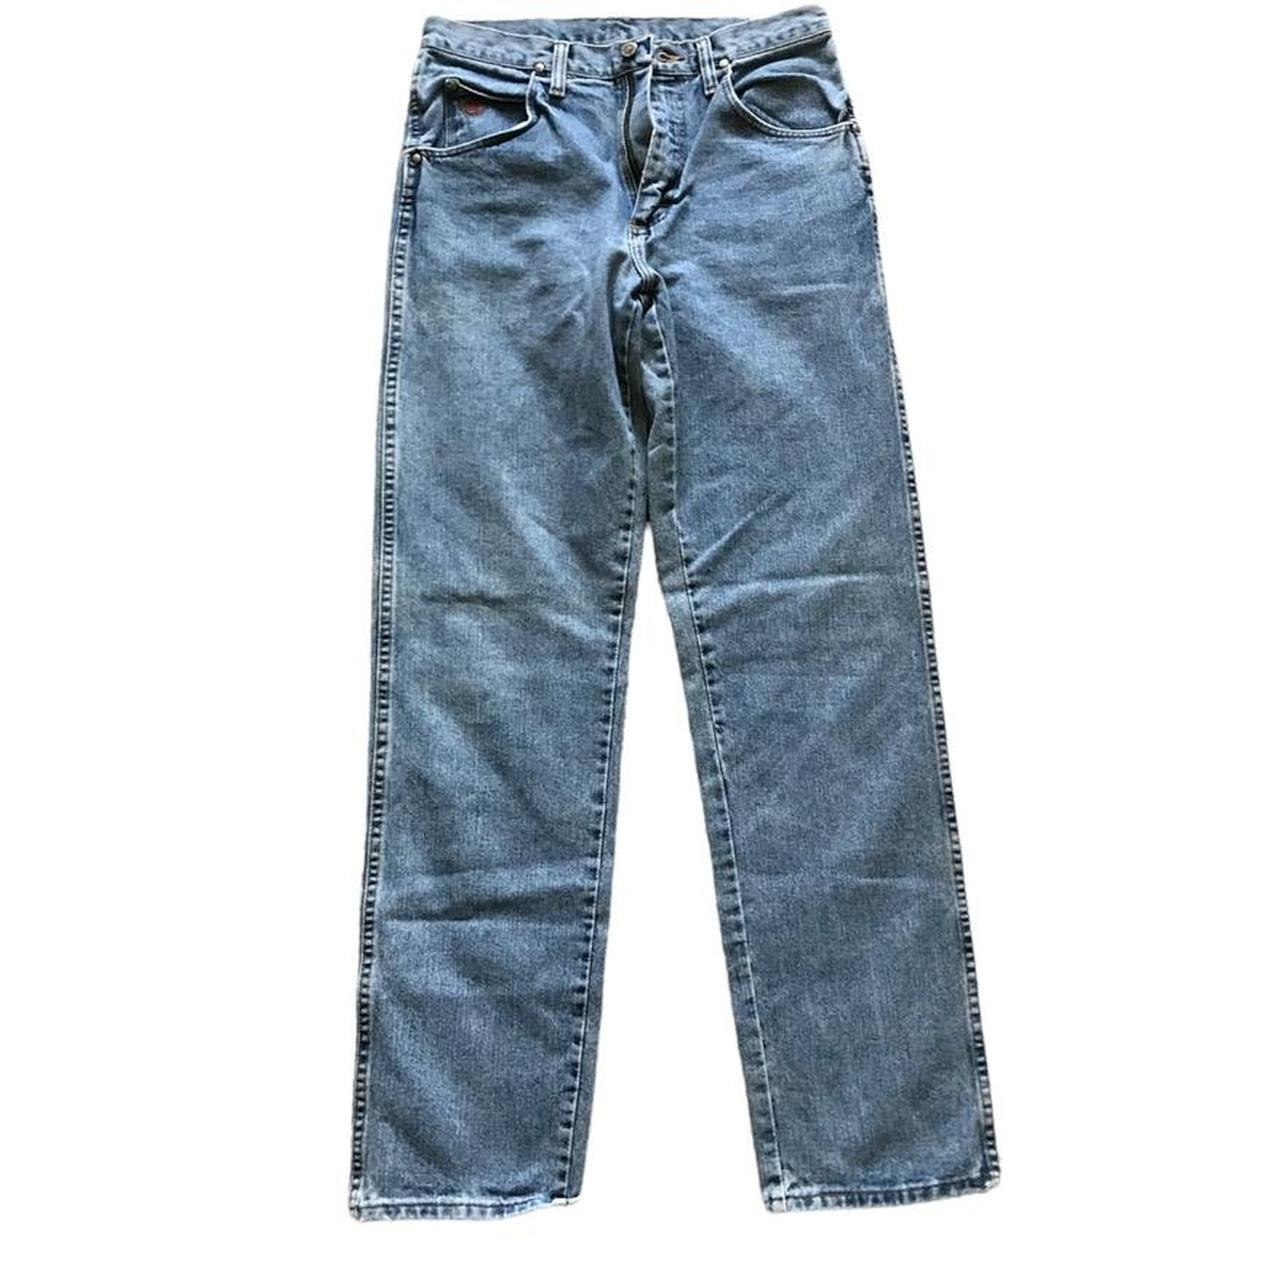 Wrangler 20x 22MWXYM jeans made in the USA. These... - Depop